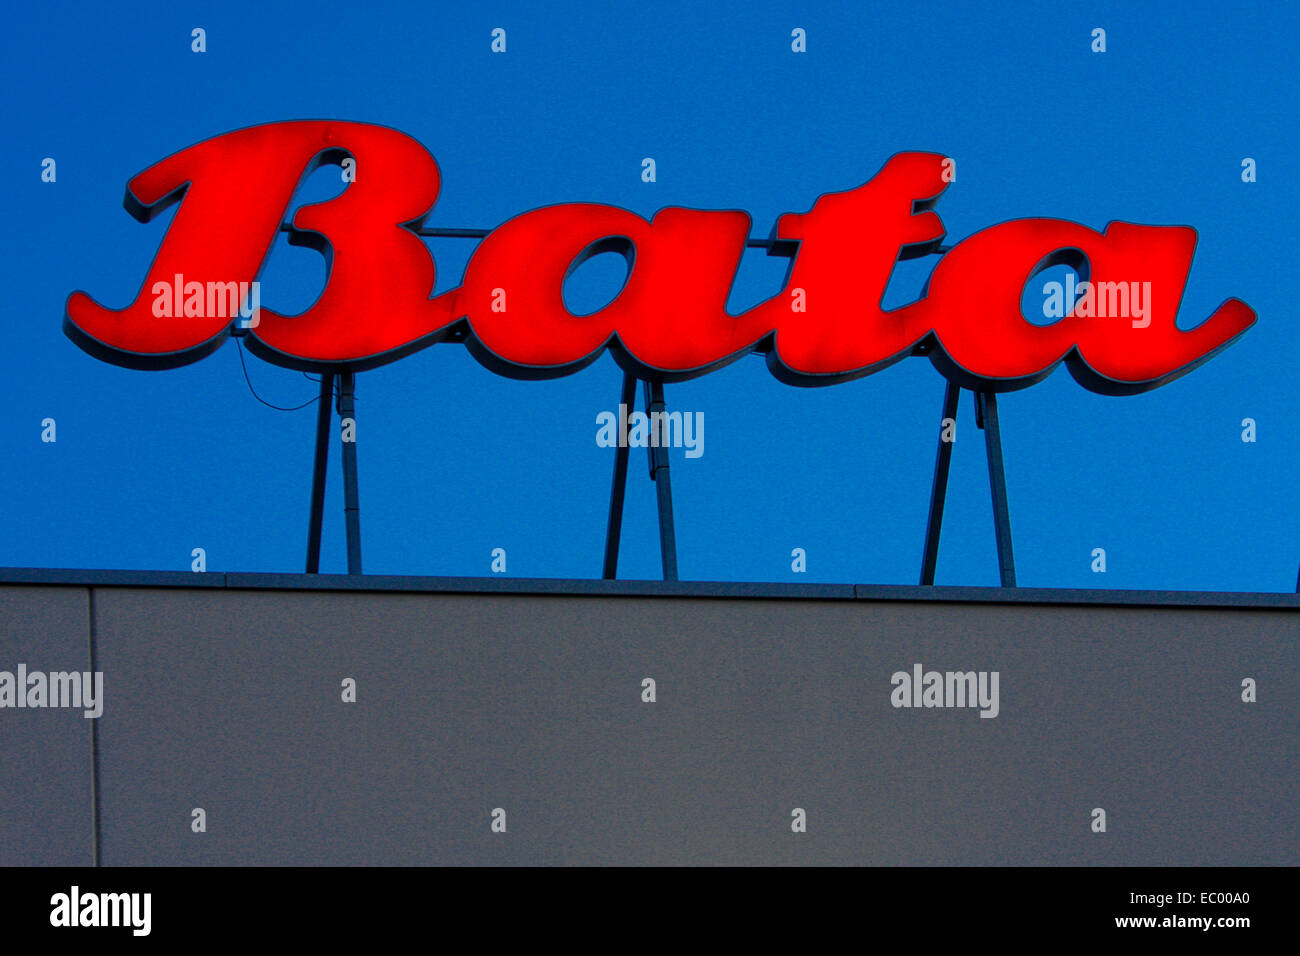 Bata Logo High Resolution Stock Photography and Images - Alamy